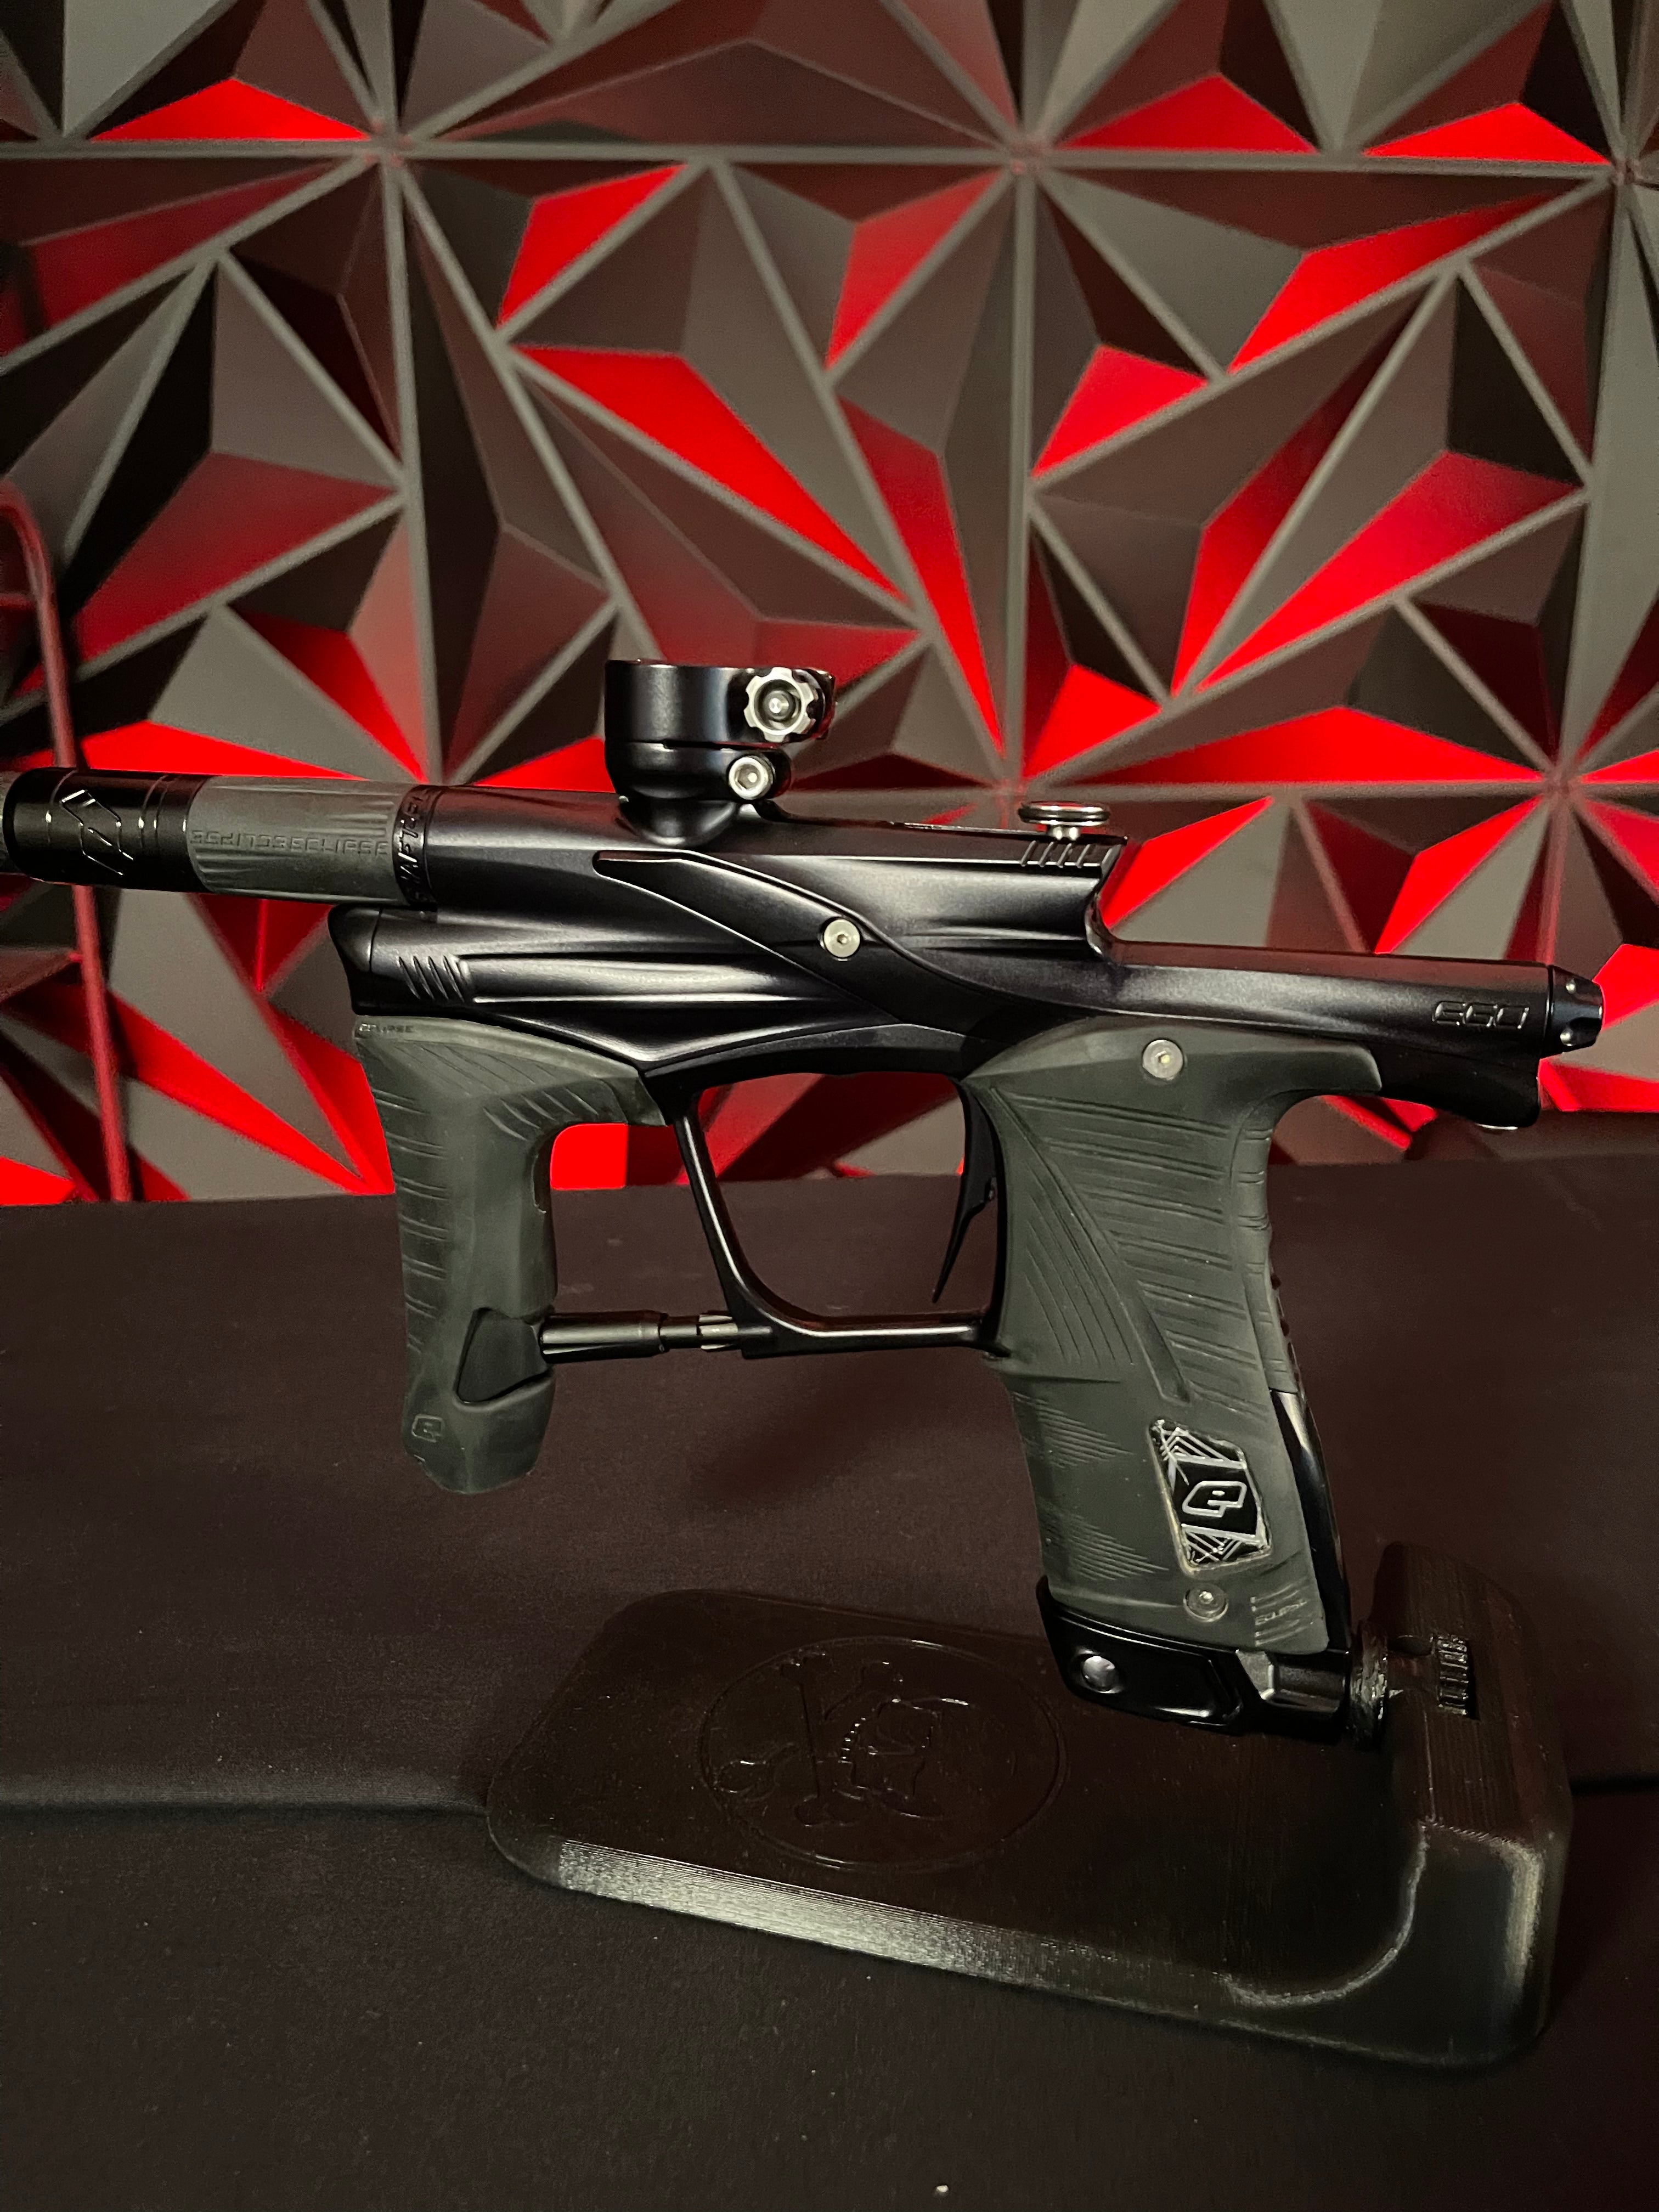 Planet Eclipse Ego LV1.6 Paintball Marker - Midnight